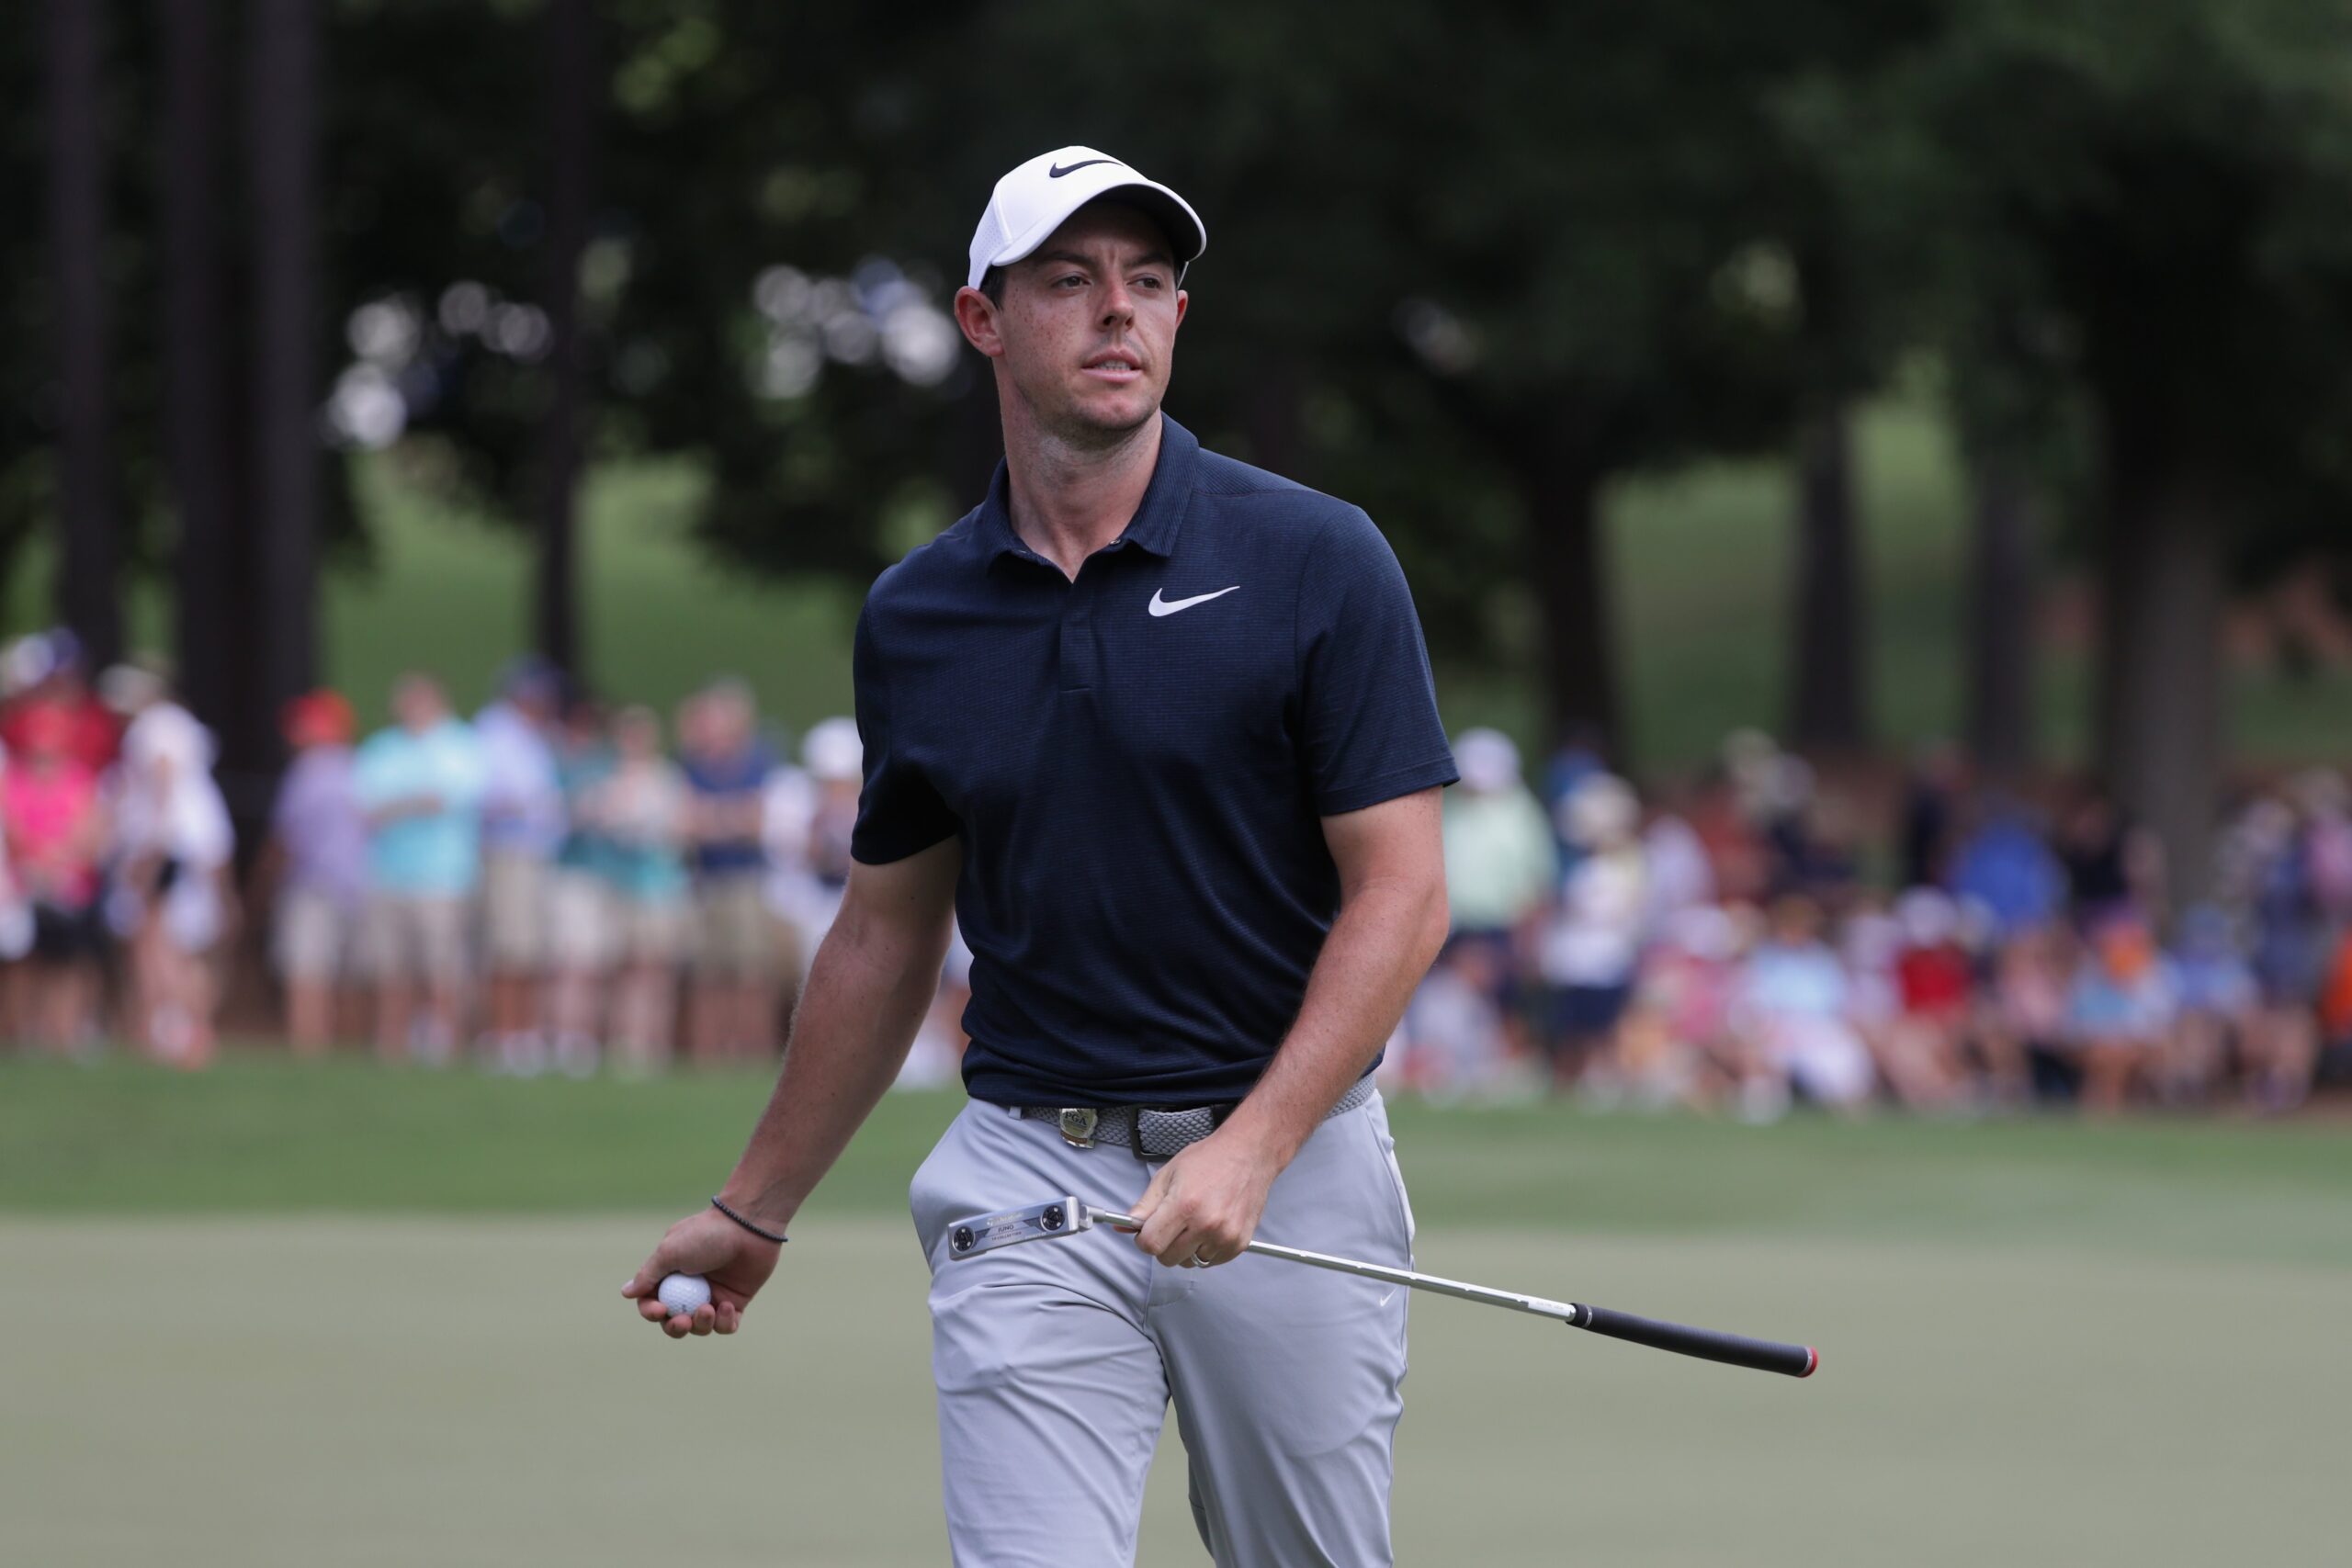 Today at the PGA Championship: Late slump leaves McIlroy off the pace